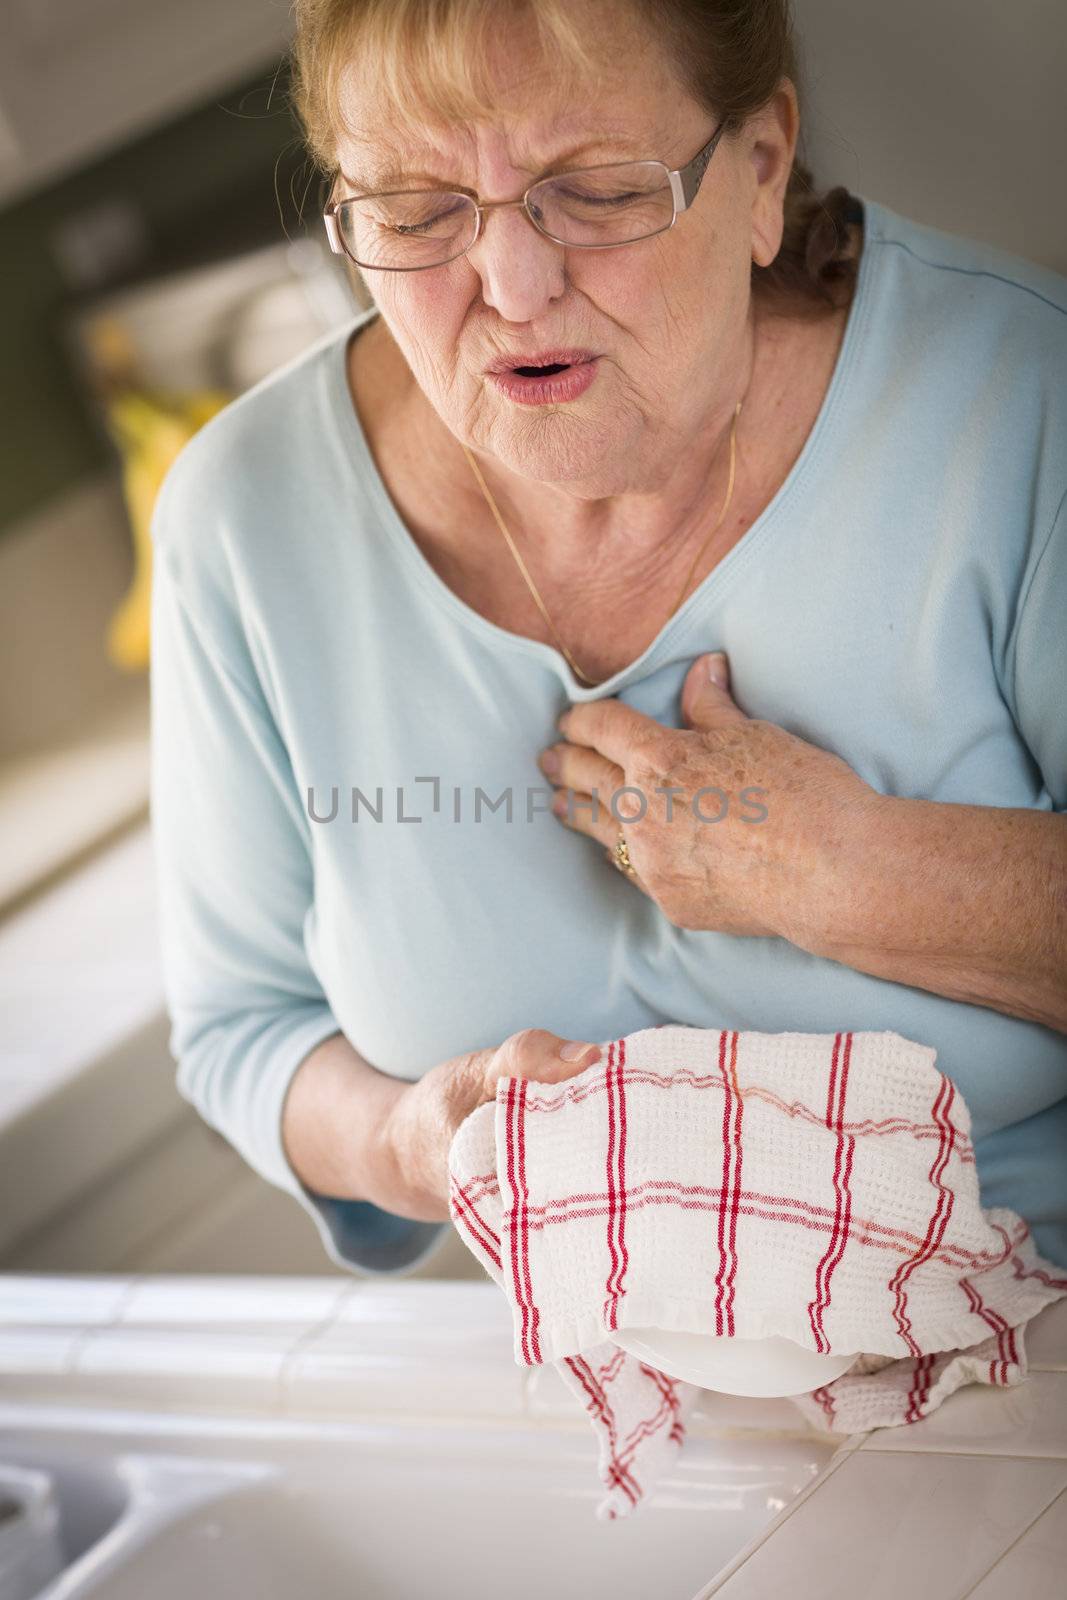 Grimacing Senior Adult Woman At Kitchen Sink With Chest Pains.